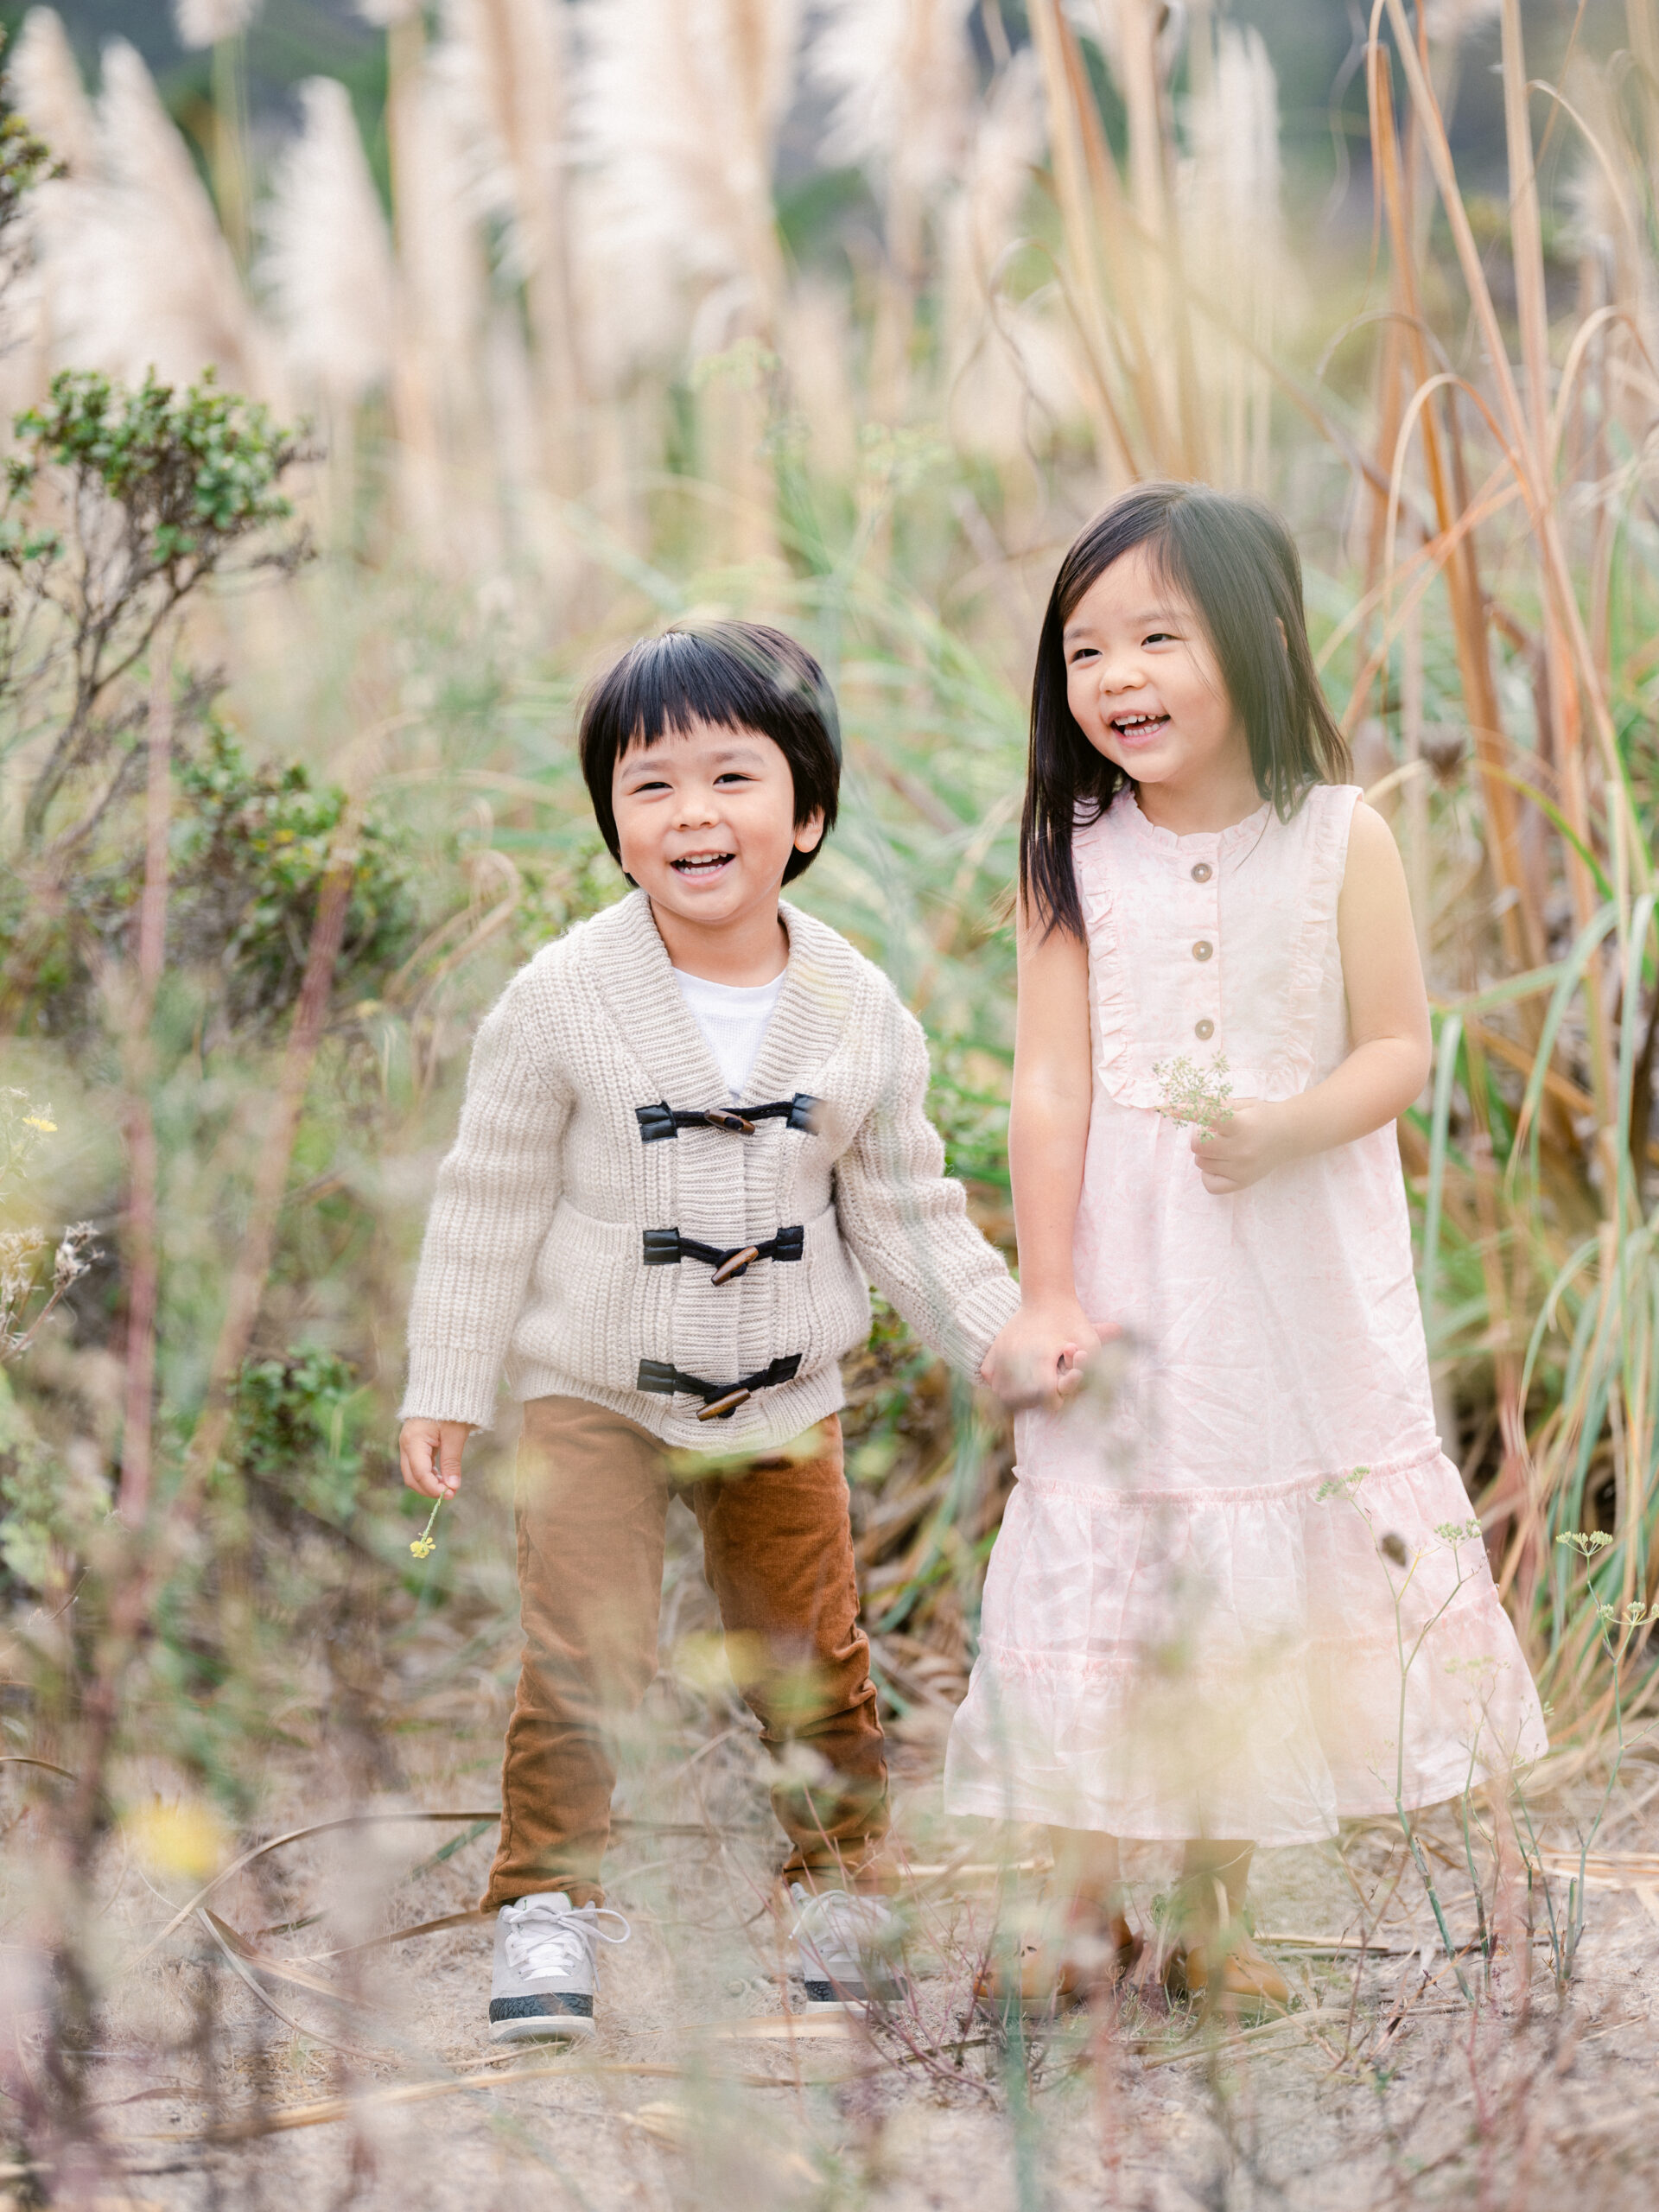 What to Wear to Your Fall Family Photoshoot